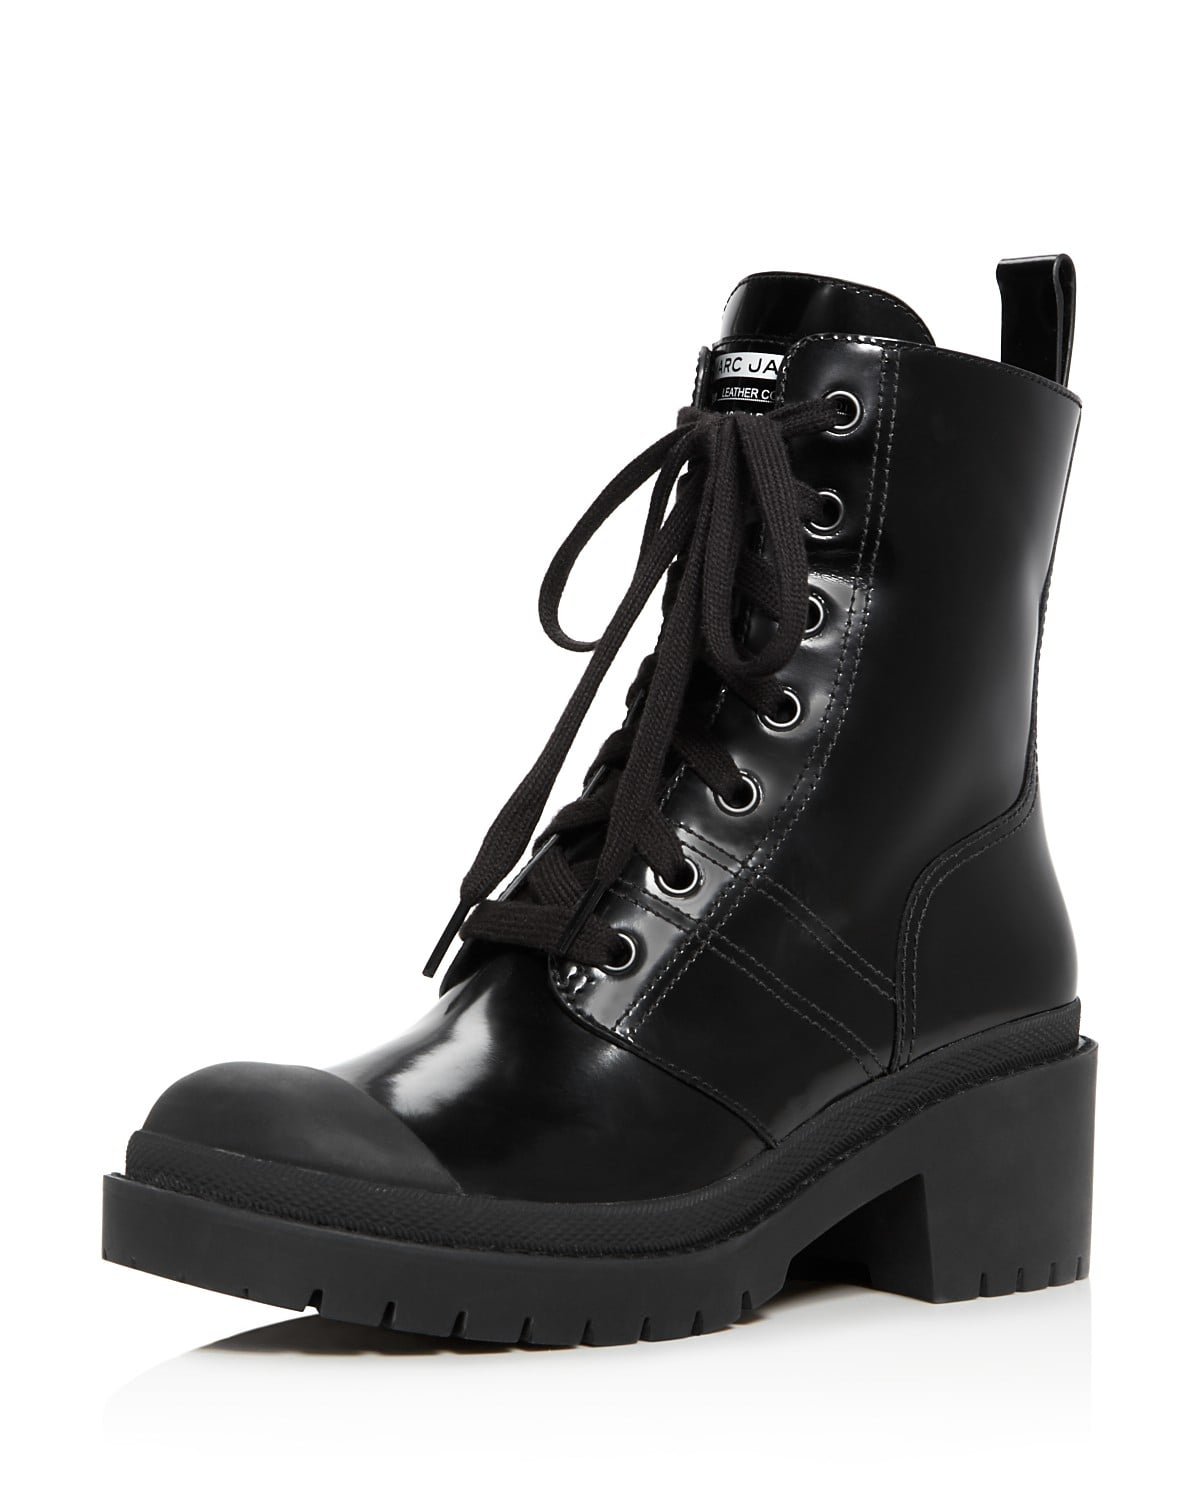 Marc Jacobs Boots | The Definitive 